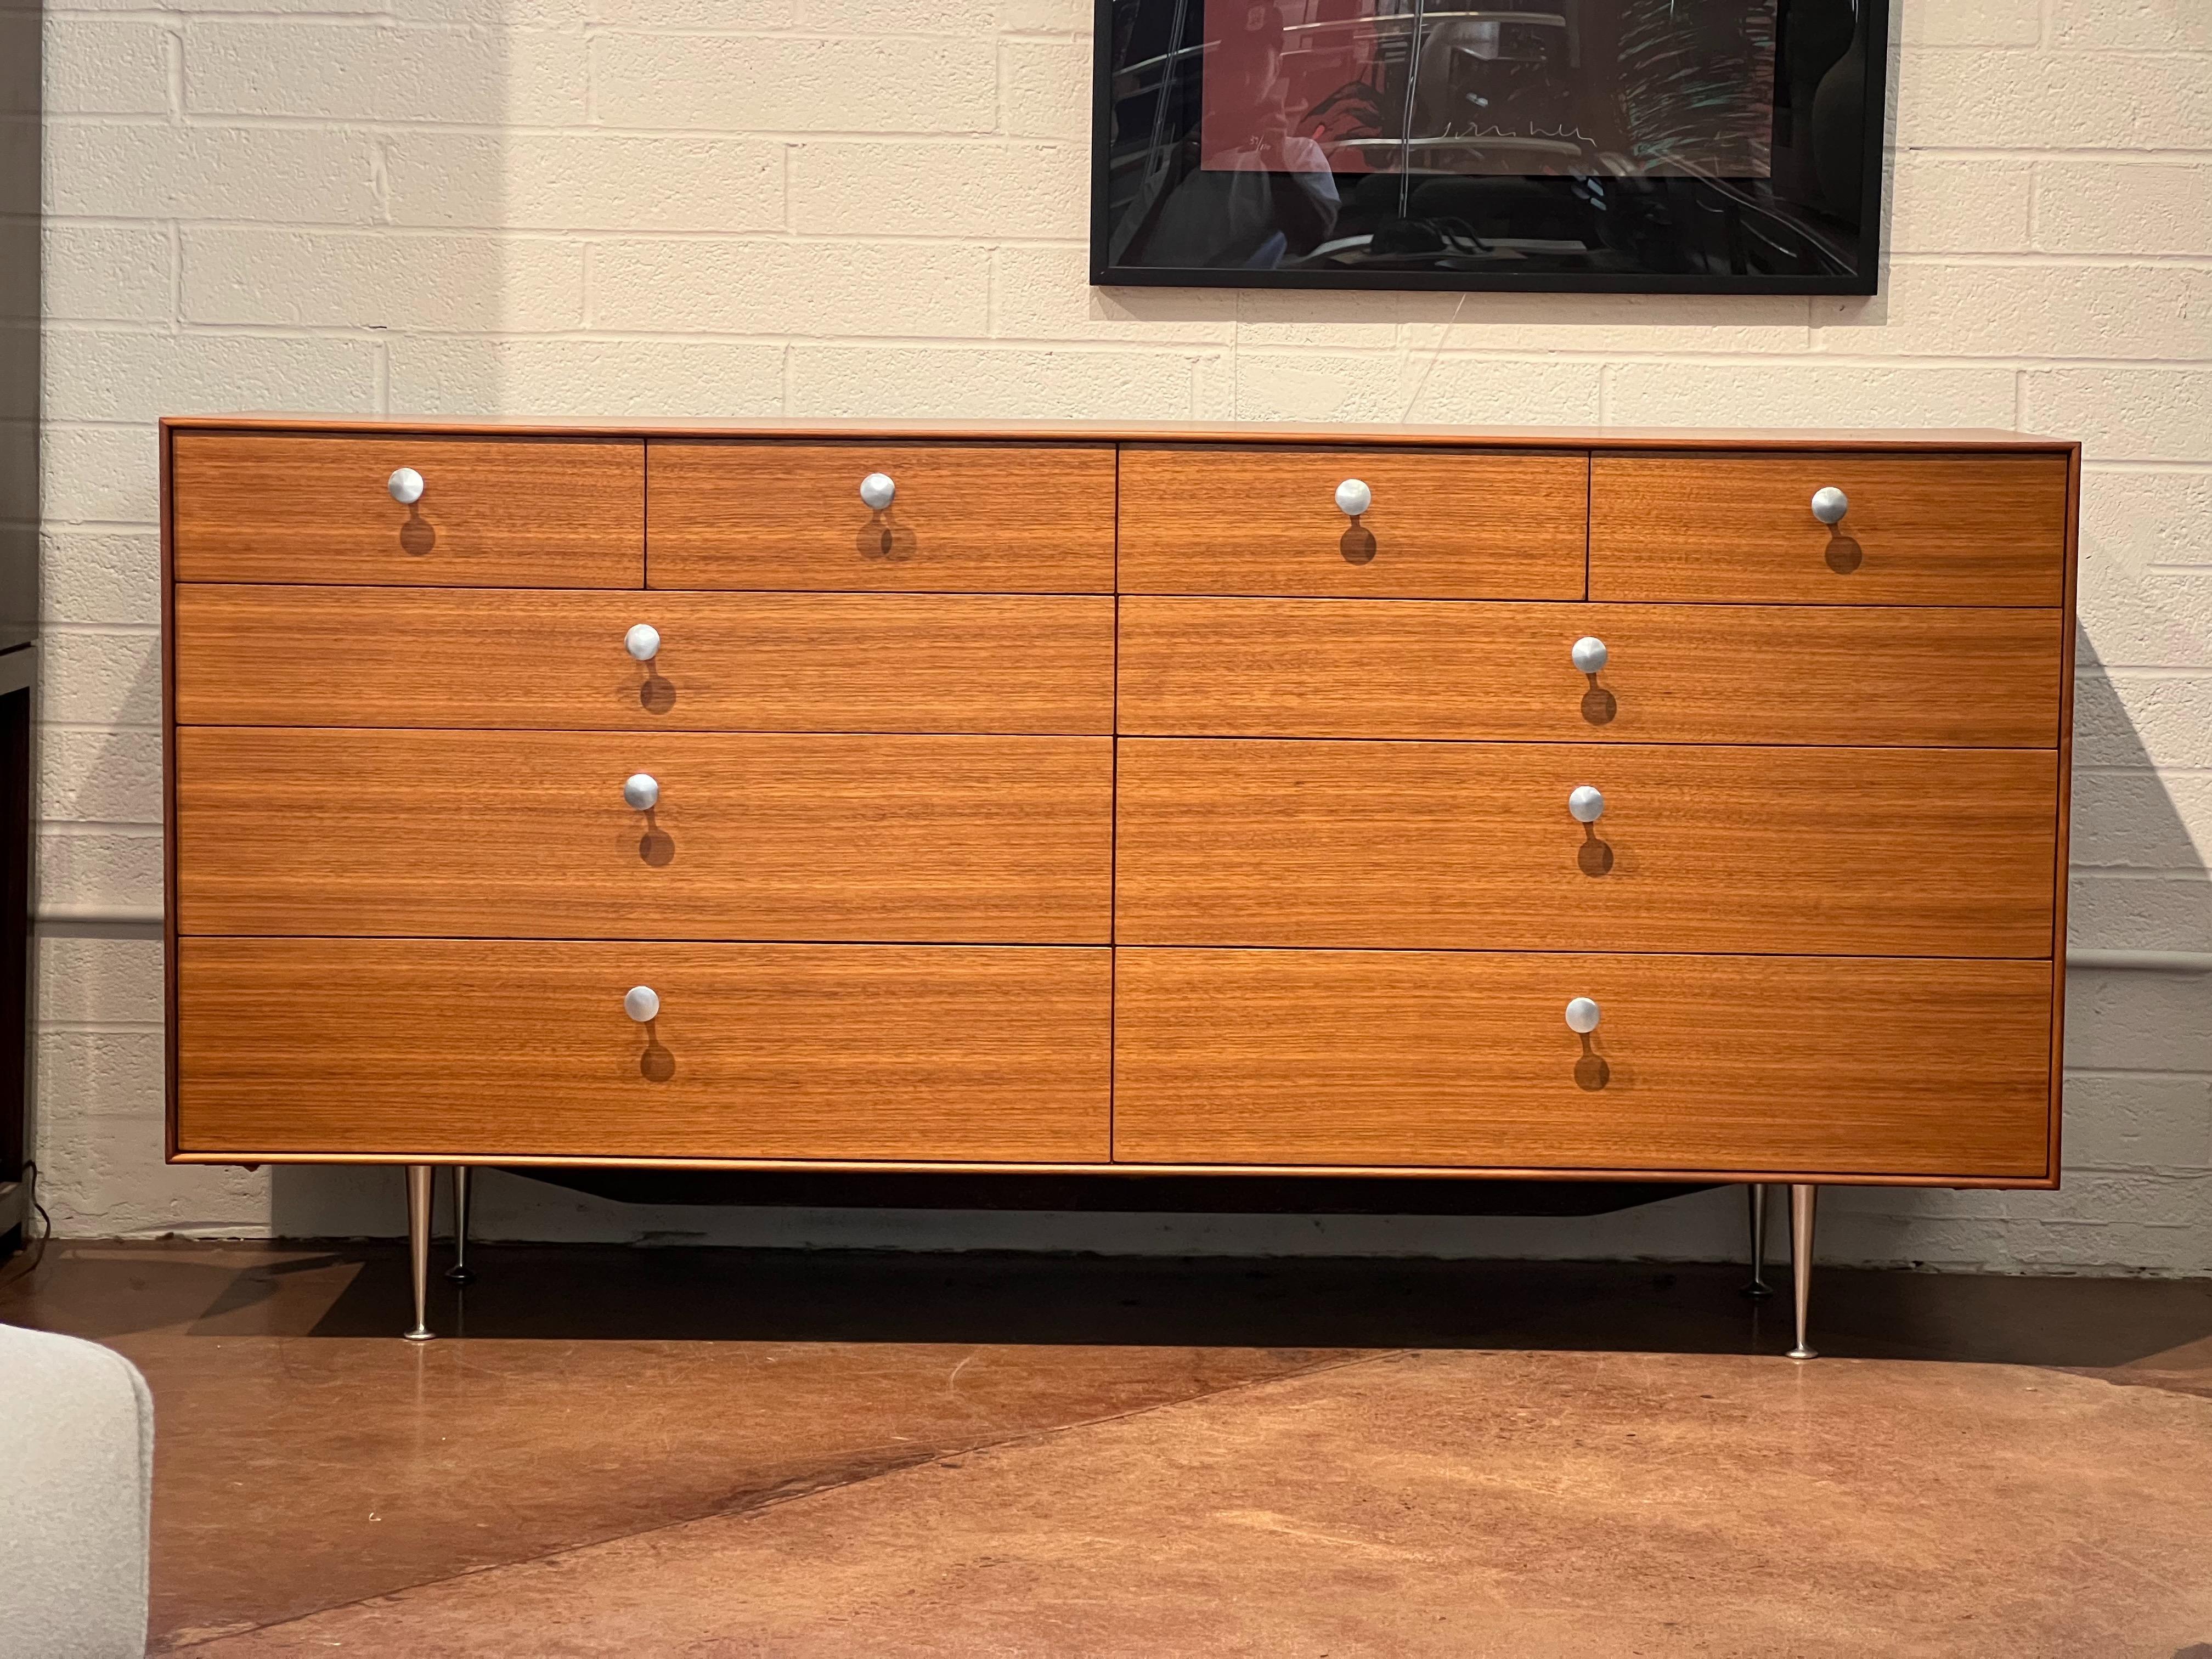 This George Nelson design for Herman Miller, Thin Edge series 10 drawer dresser is in great condition and ready to be enjoyed for years to come.

 It’s an iconic style that was originally designed as a double dresser. The second row of drawers comes